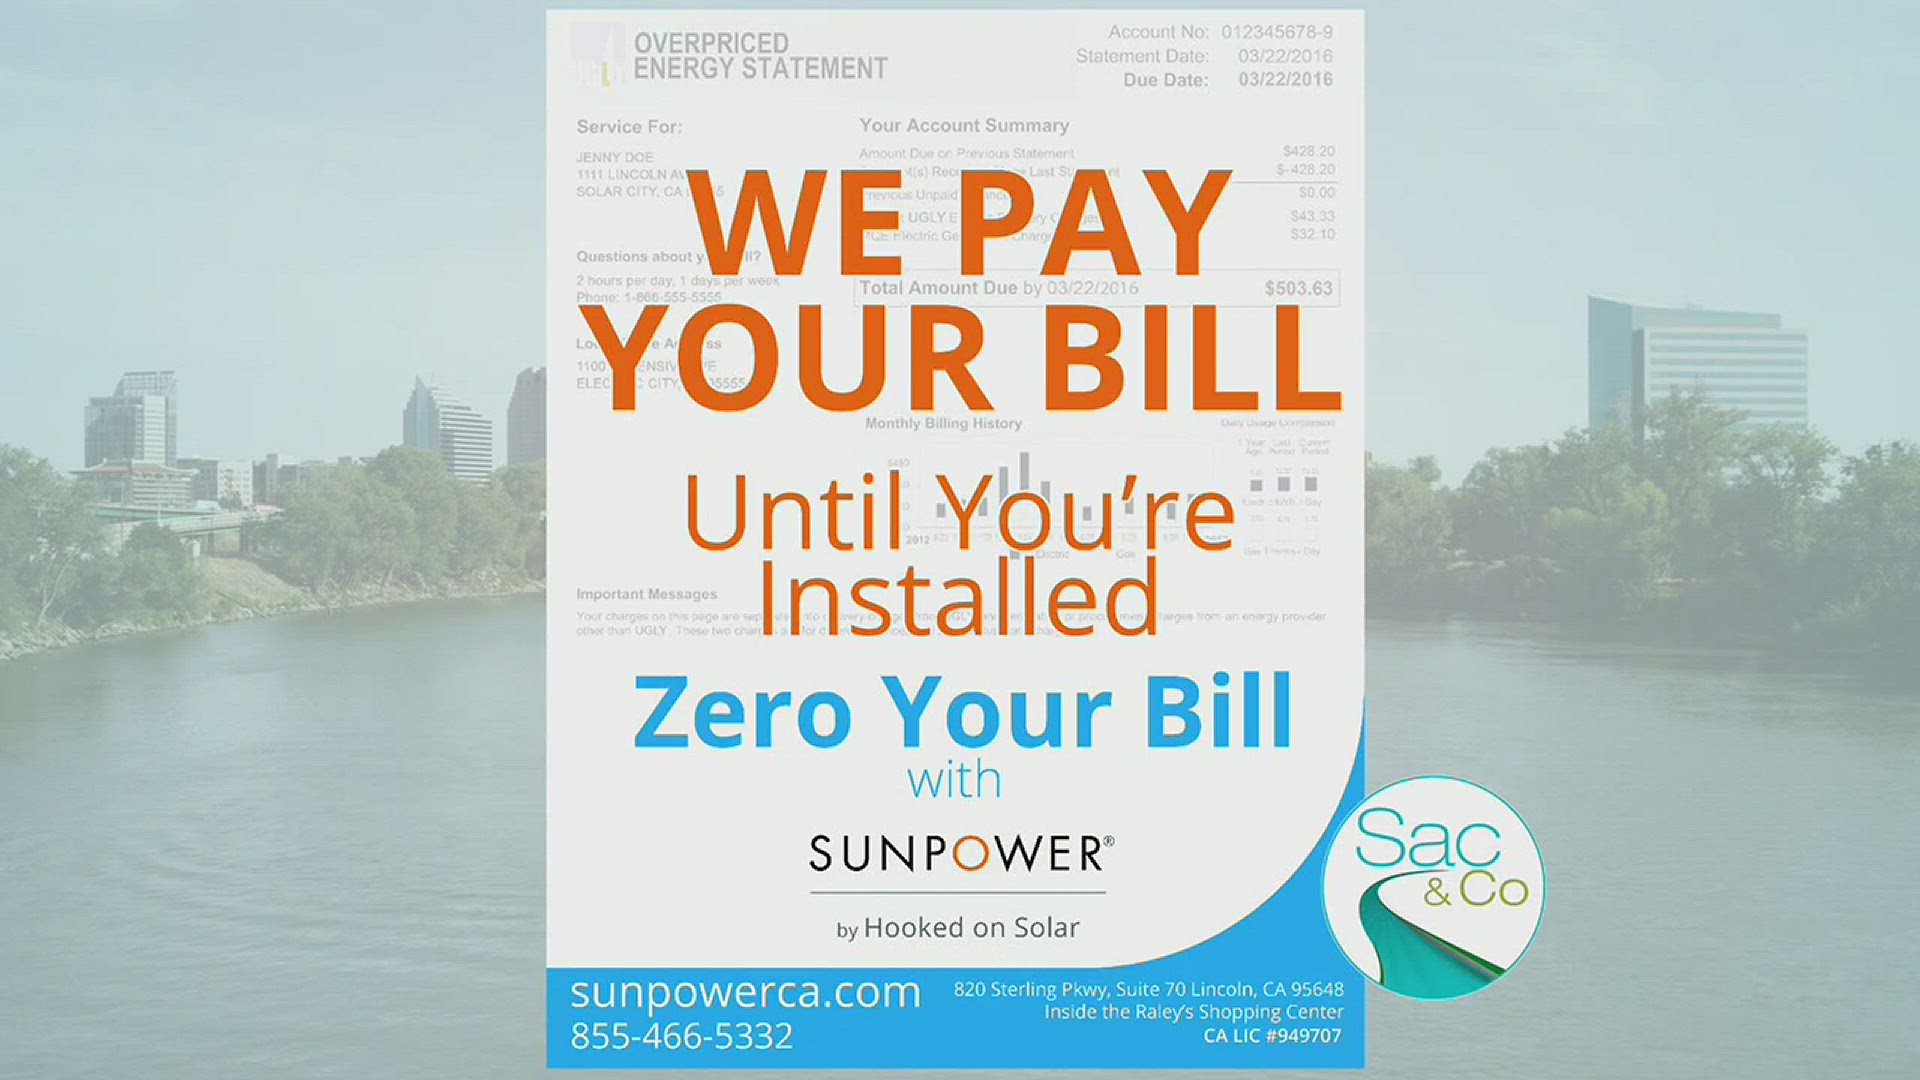 Find out how to take advantage of a energy saving program offered through SunPower by Hooked on Solar.